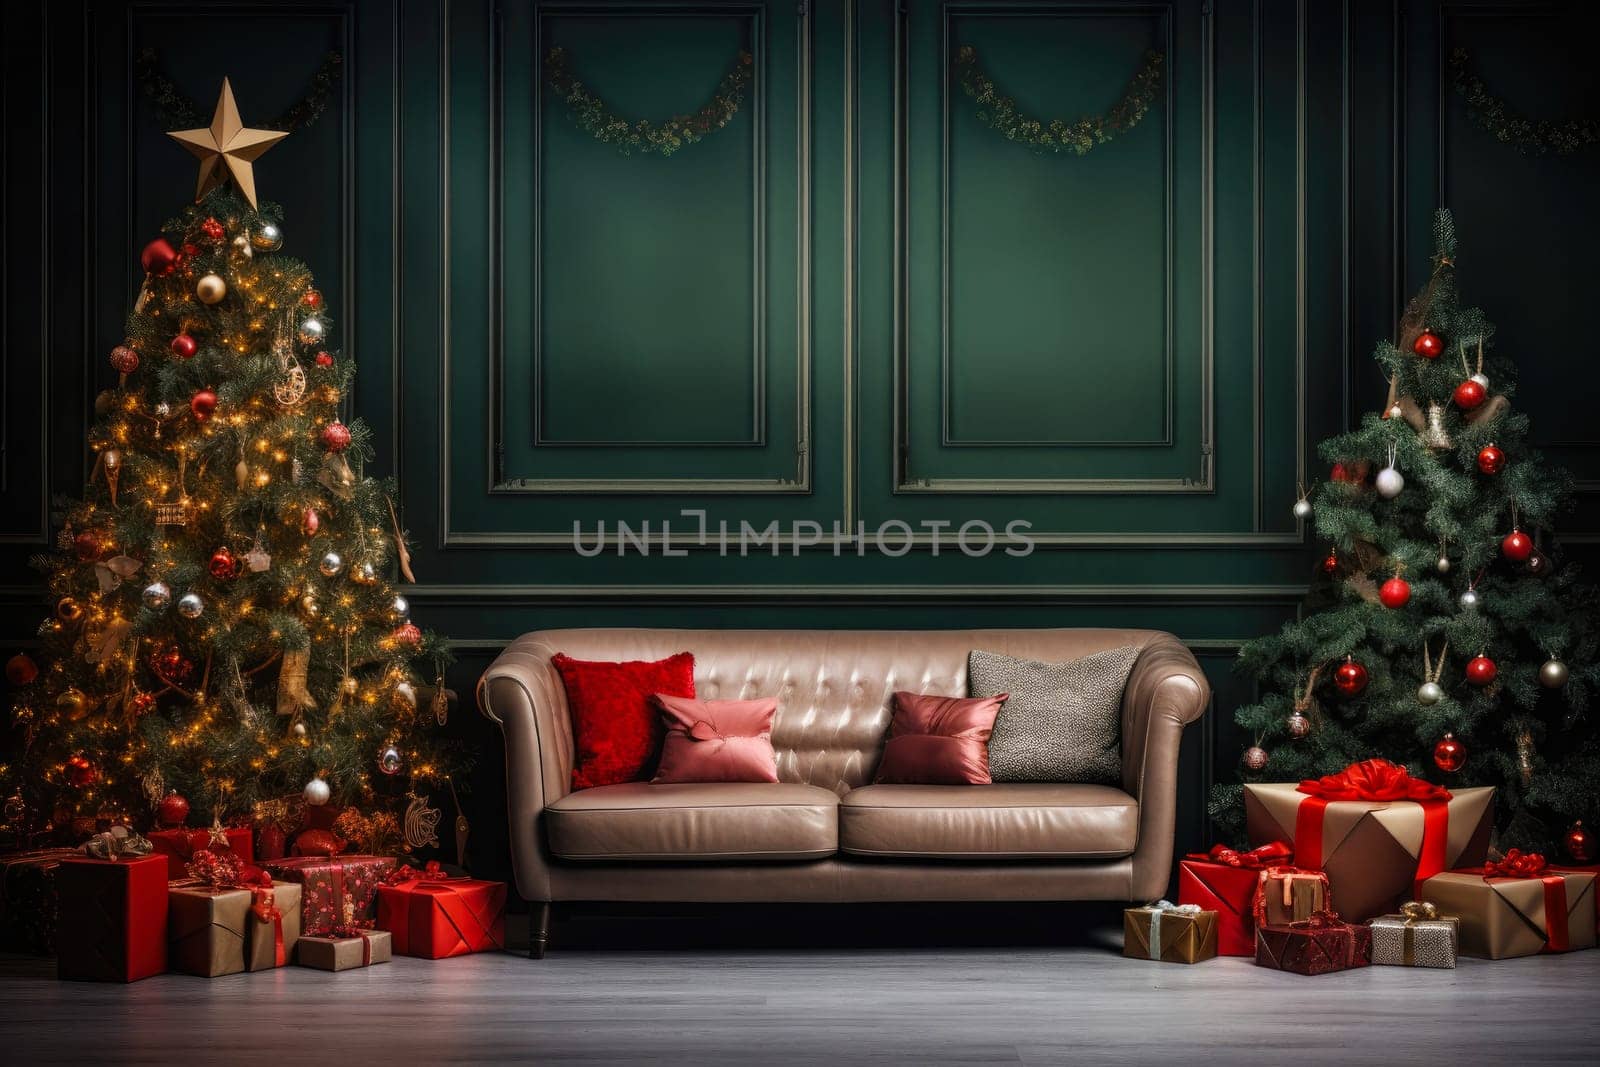 Christmas background with Christmas tree, gifts and sofa against a wall with empty space. Mock up. Christmas card